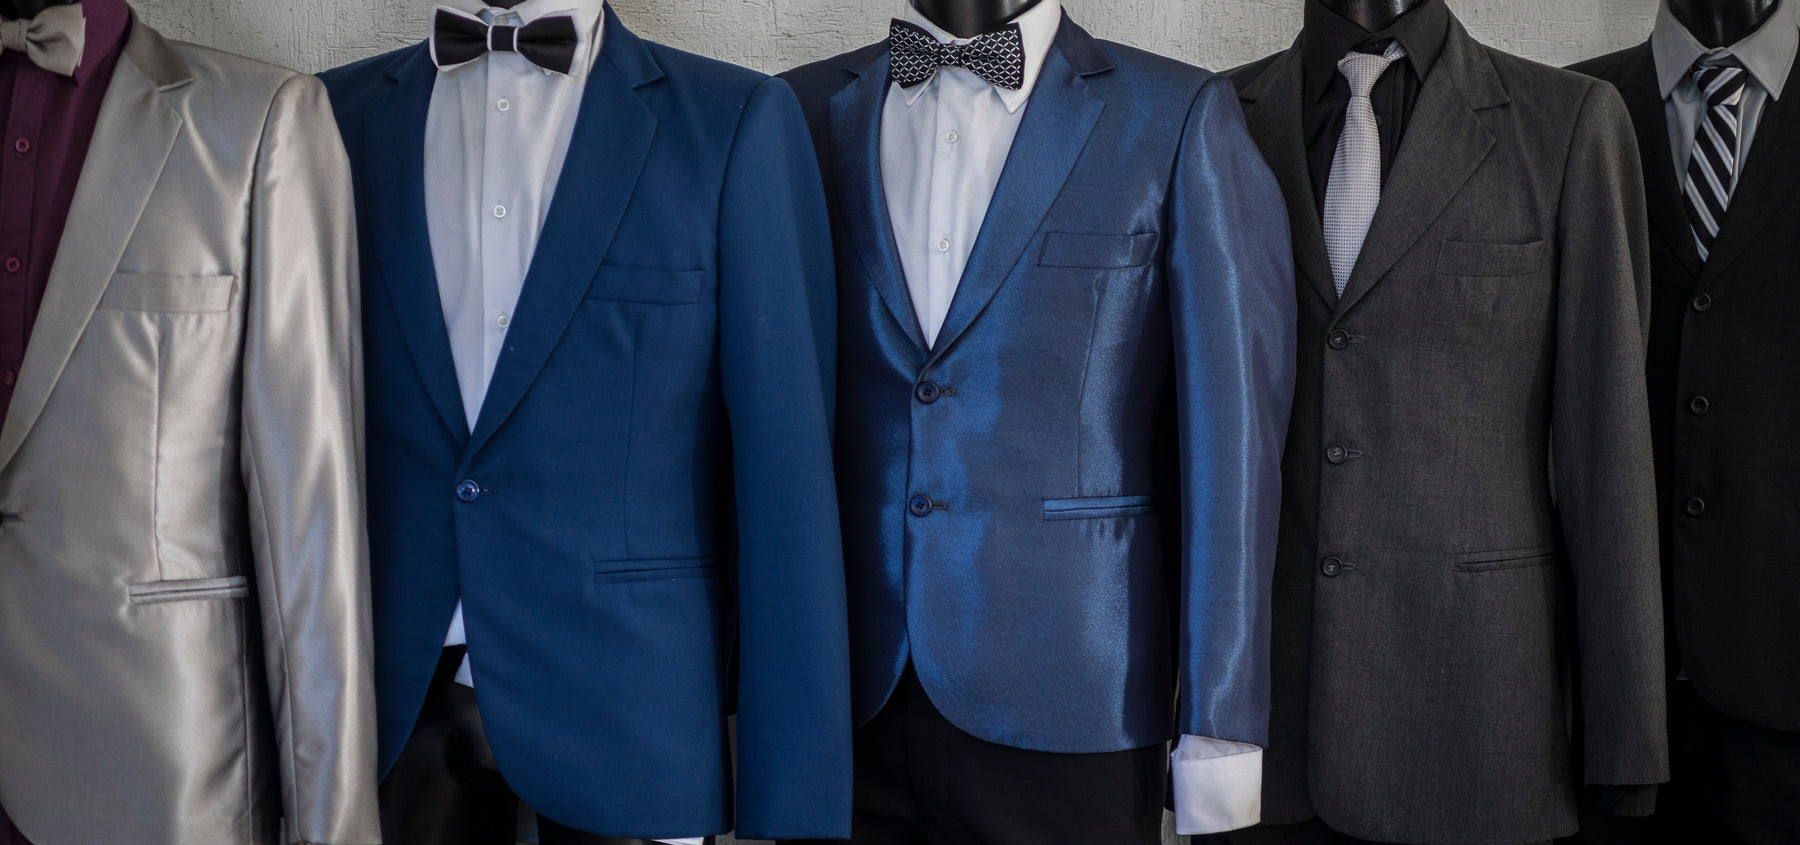 Assorted Colored Suits And Tuxedos For Prom